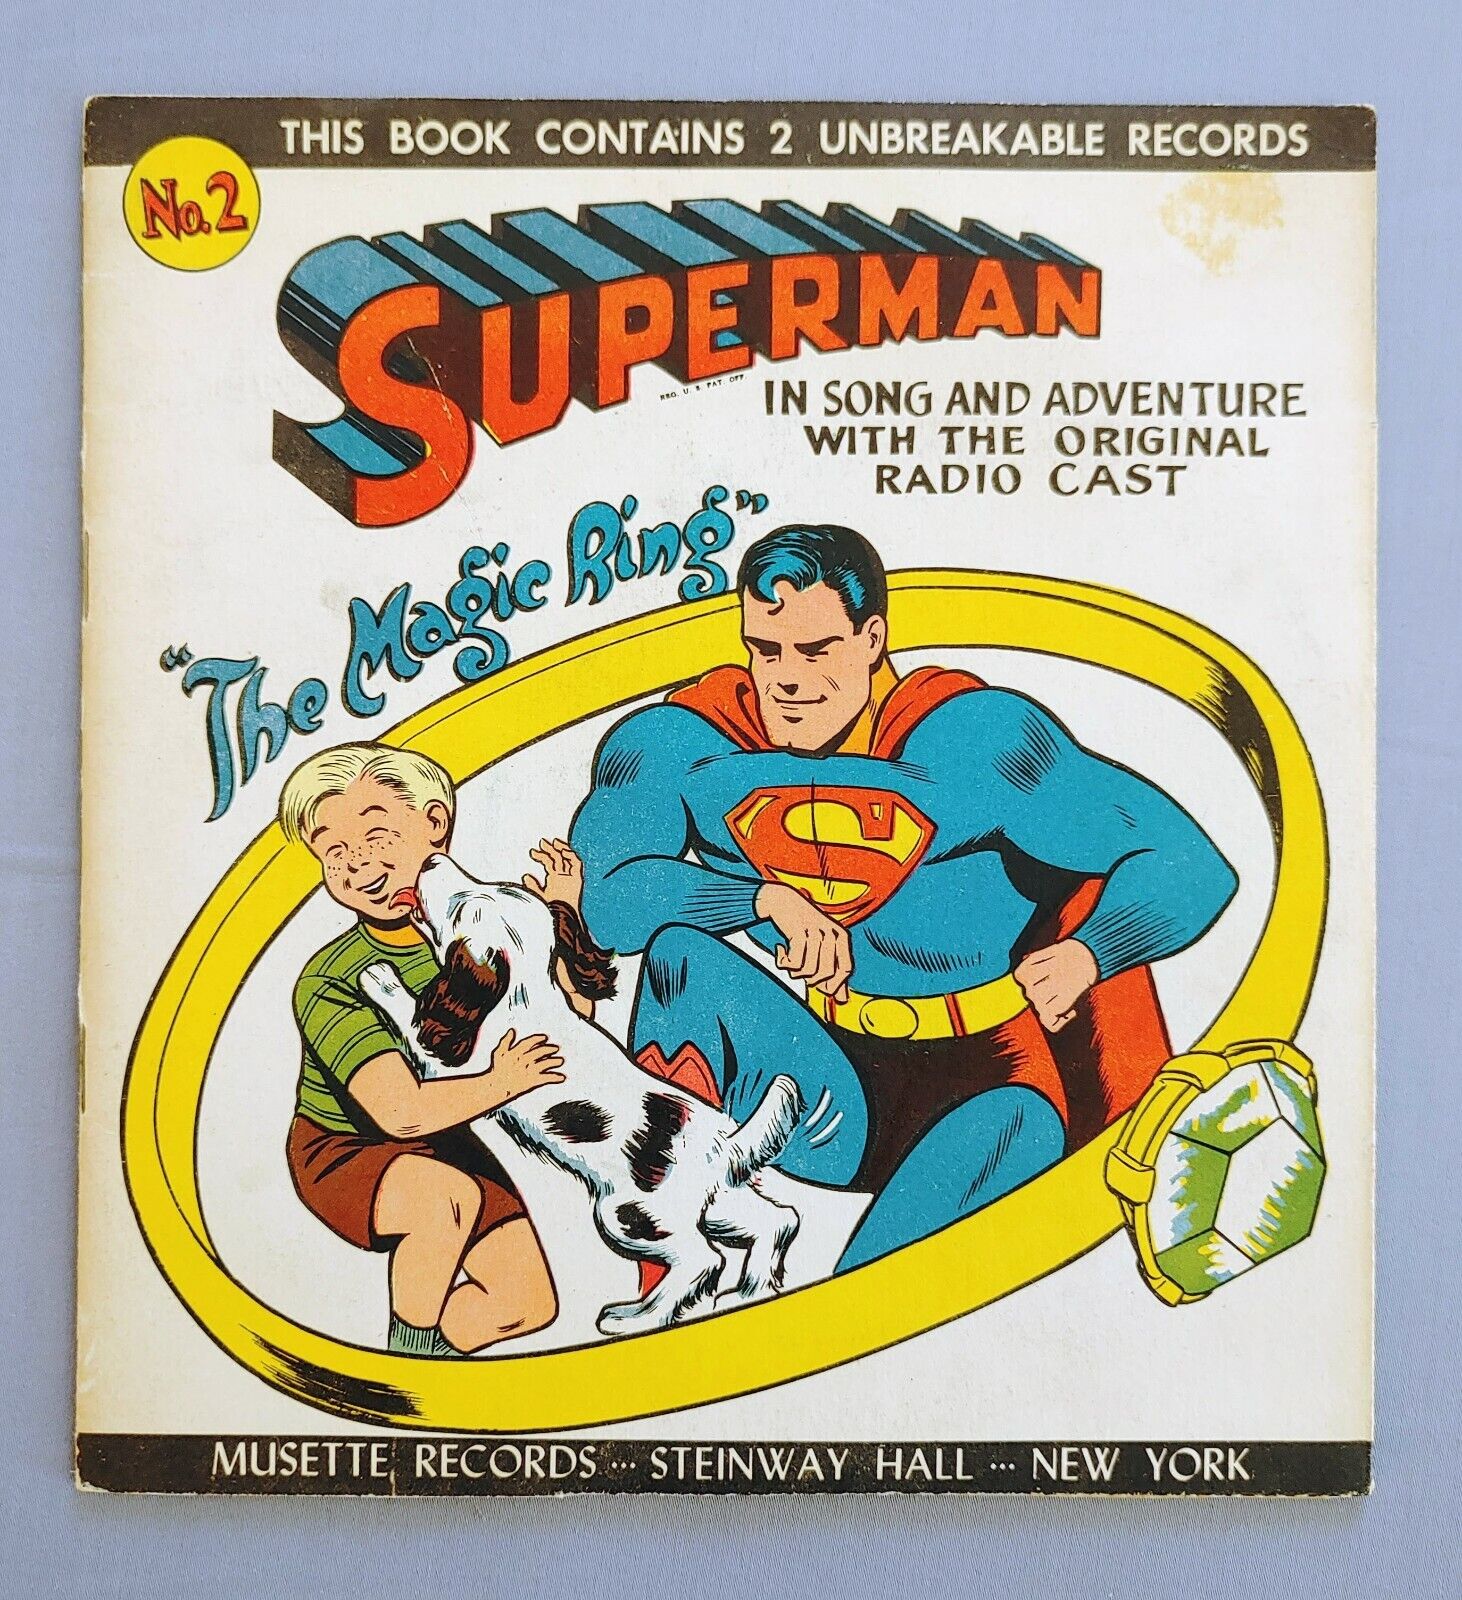 SUPERMAN, THE MAGIC RING, BOOK AND RECORD #2 , MUSETTE RECORDS, 1947, STEINWAY